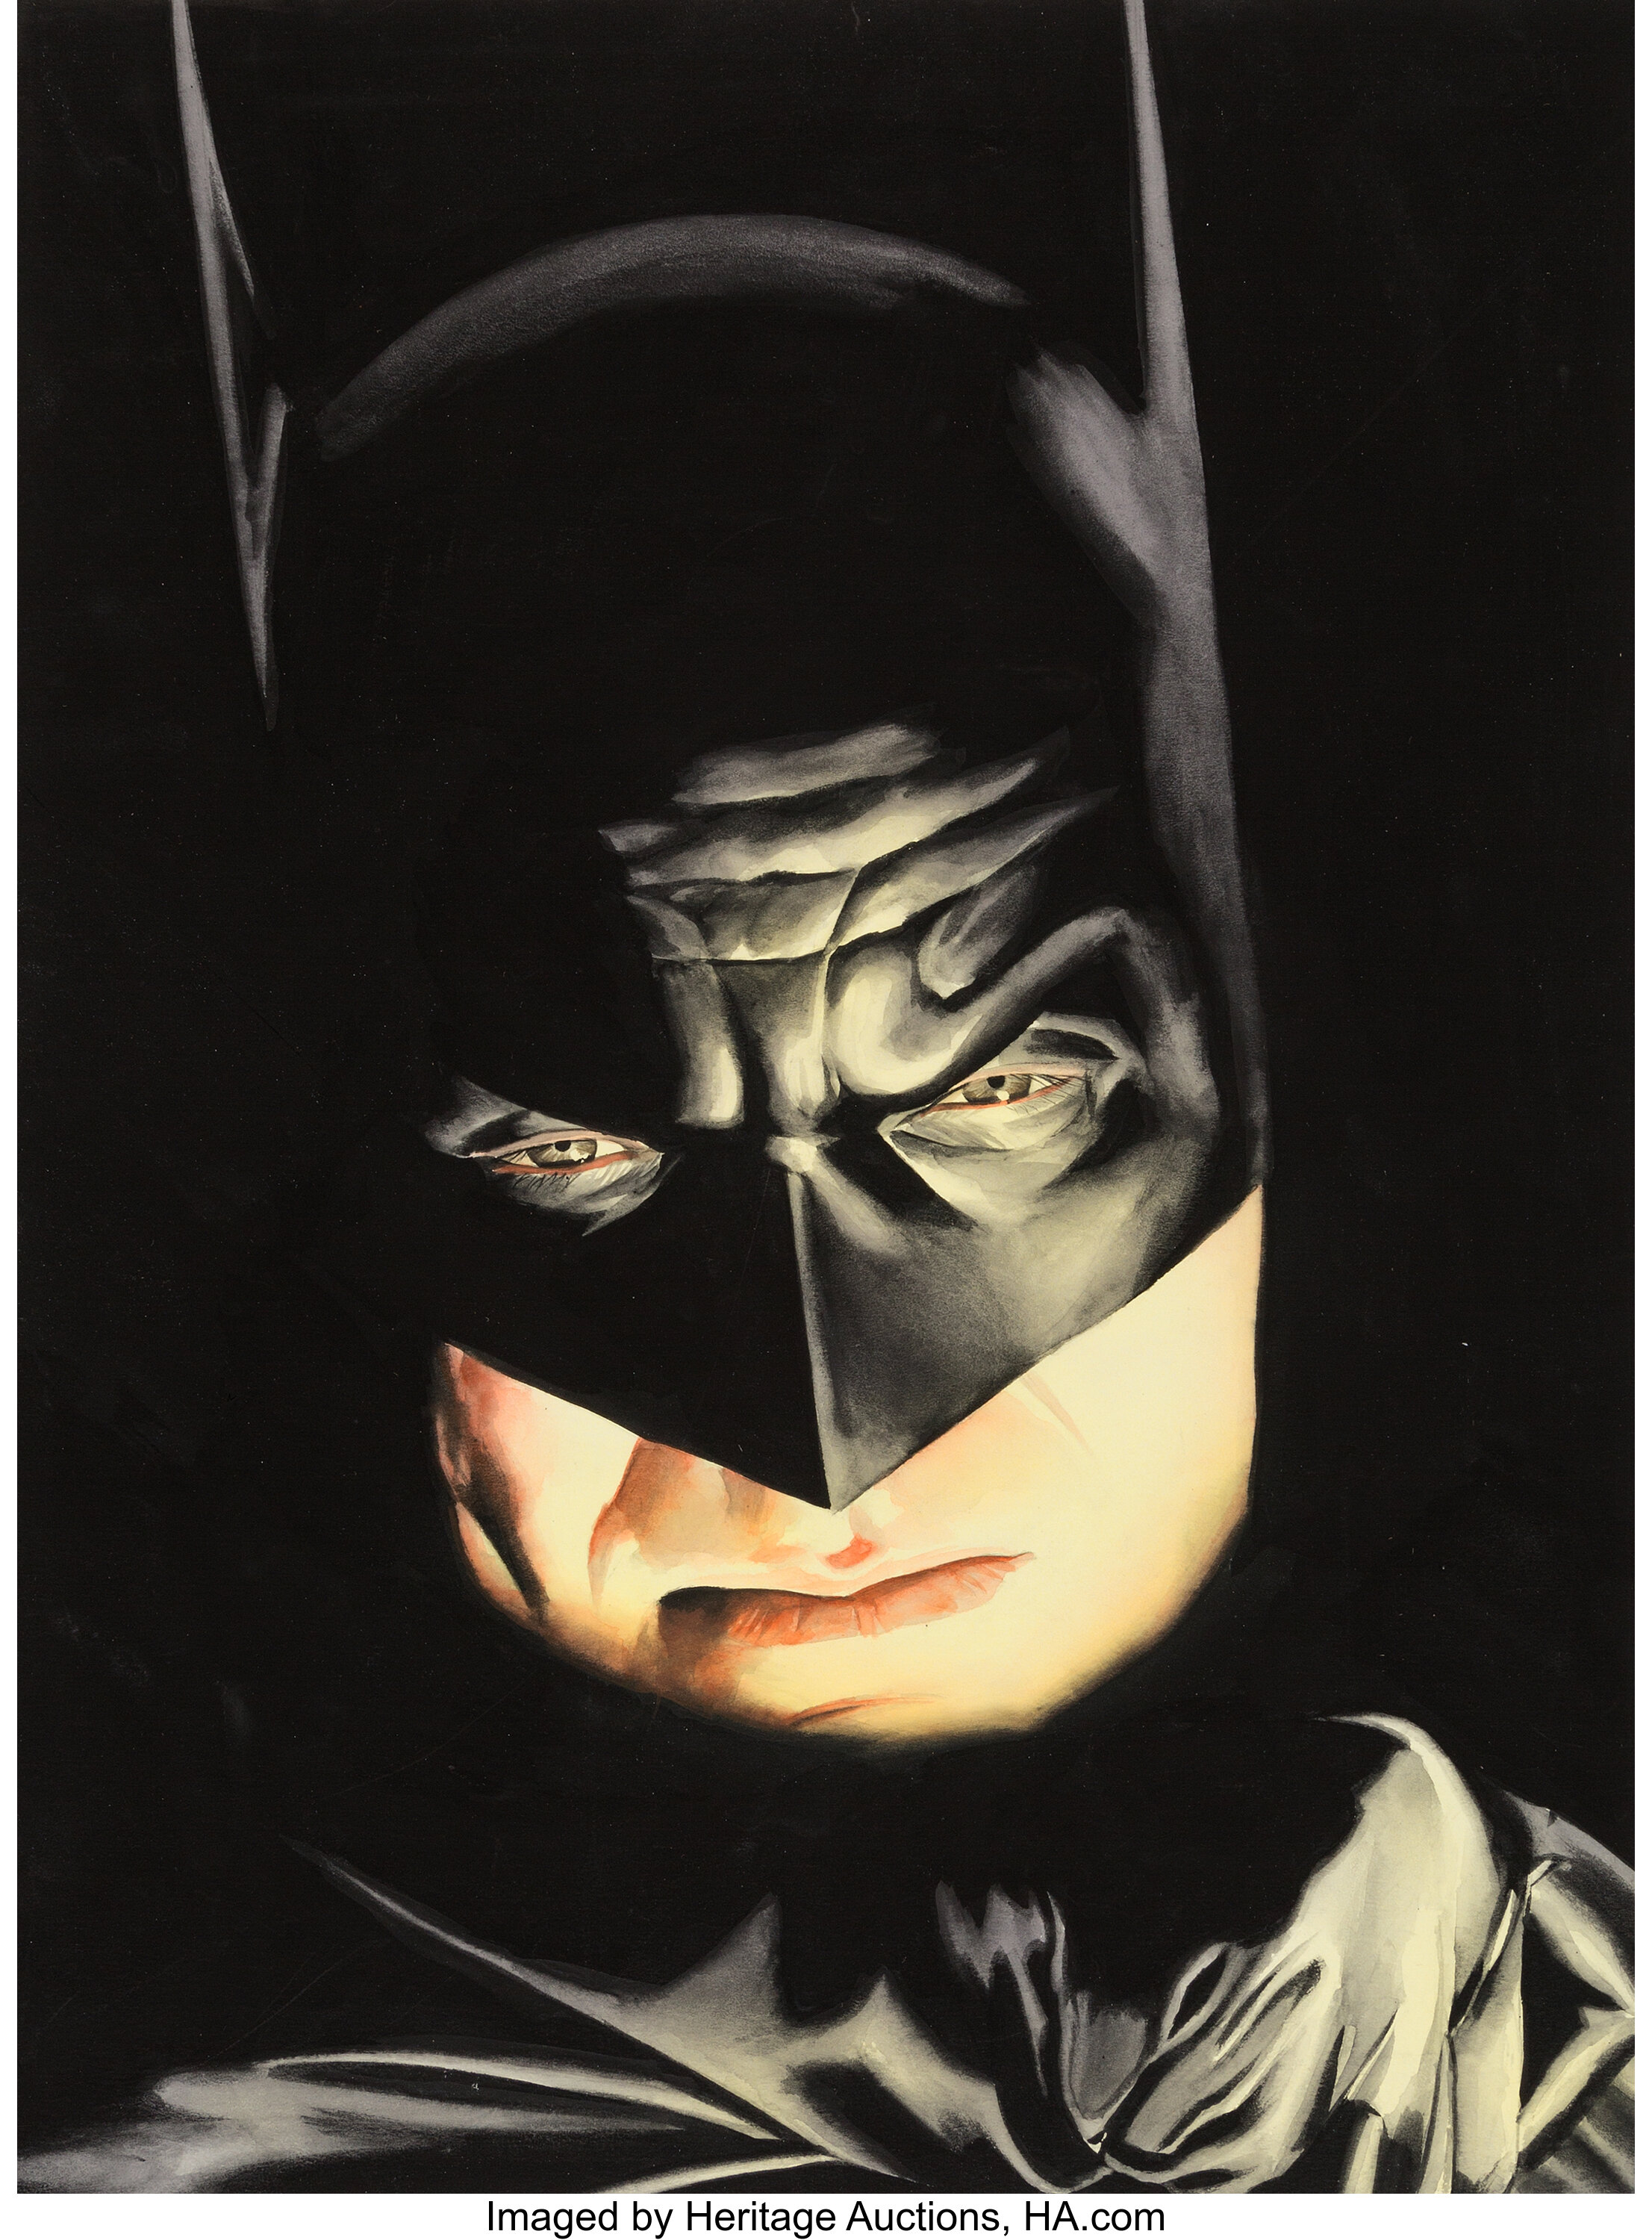 Alex Ross Comic Book Art for Sale | Value Guide | Heritage Auctions